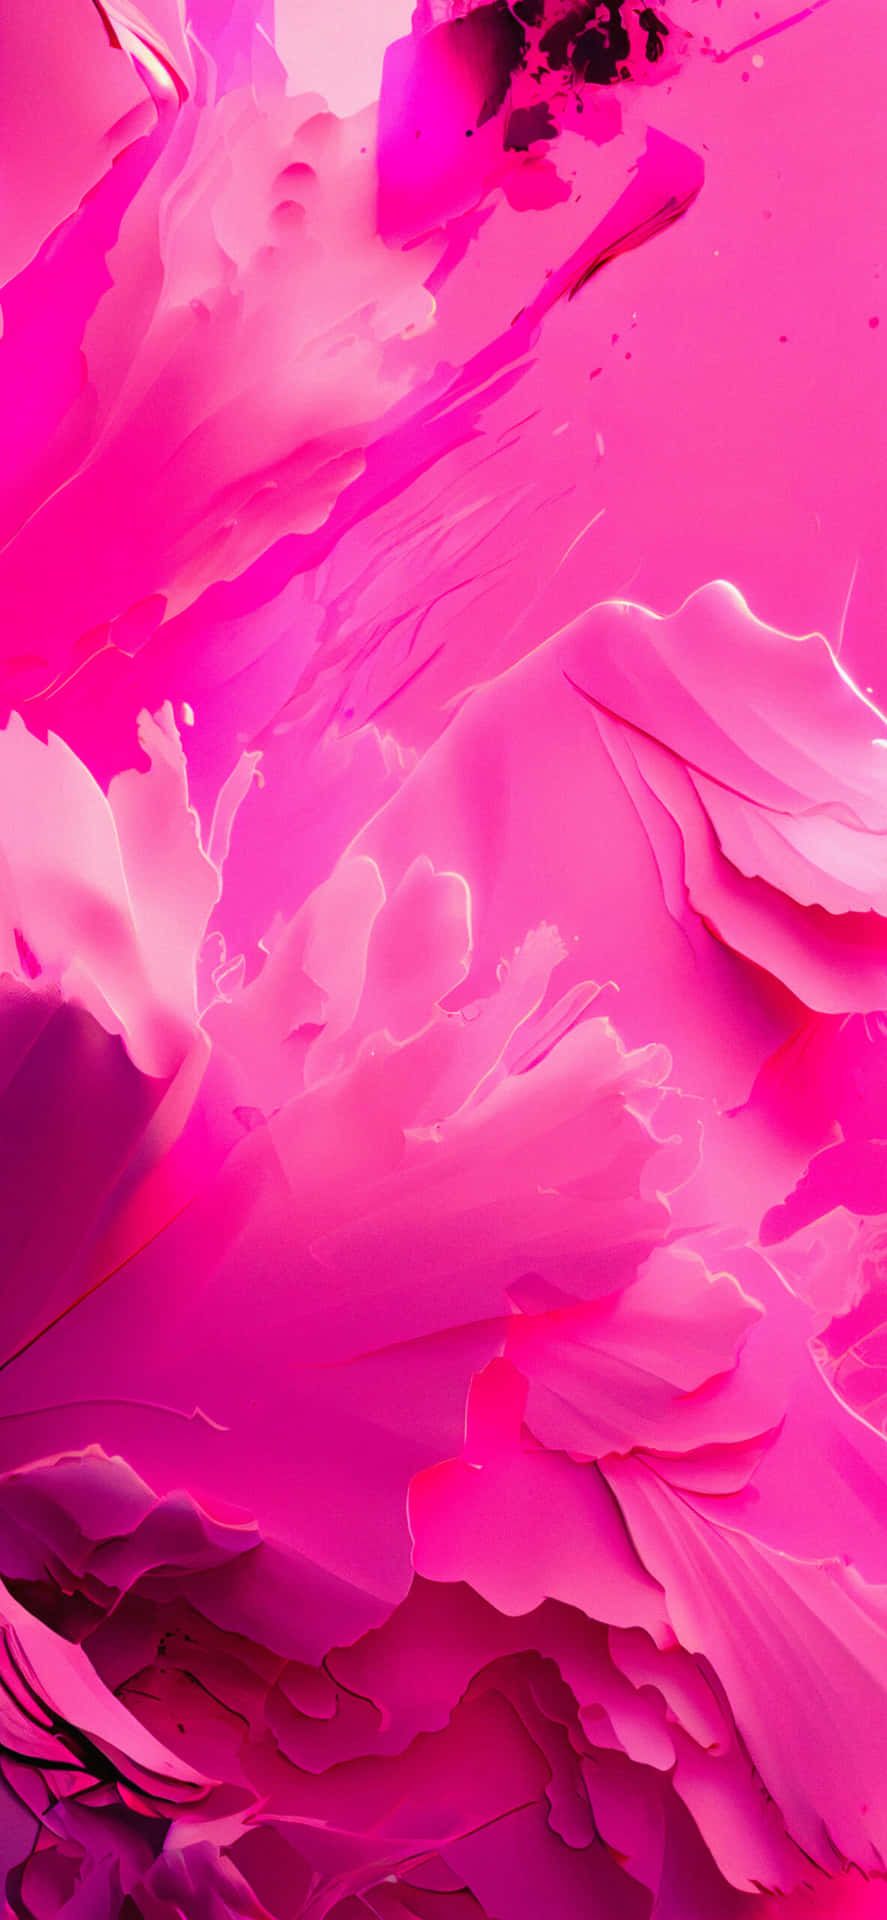 A captivating bright pink background